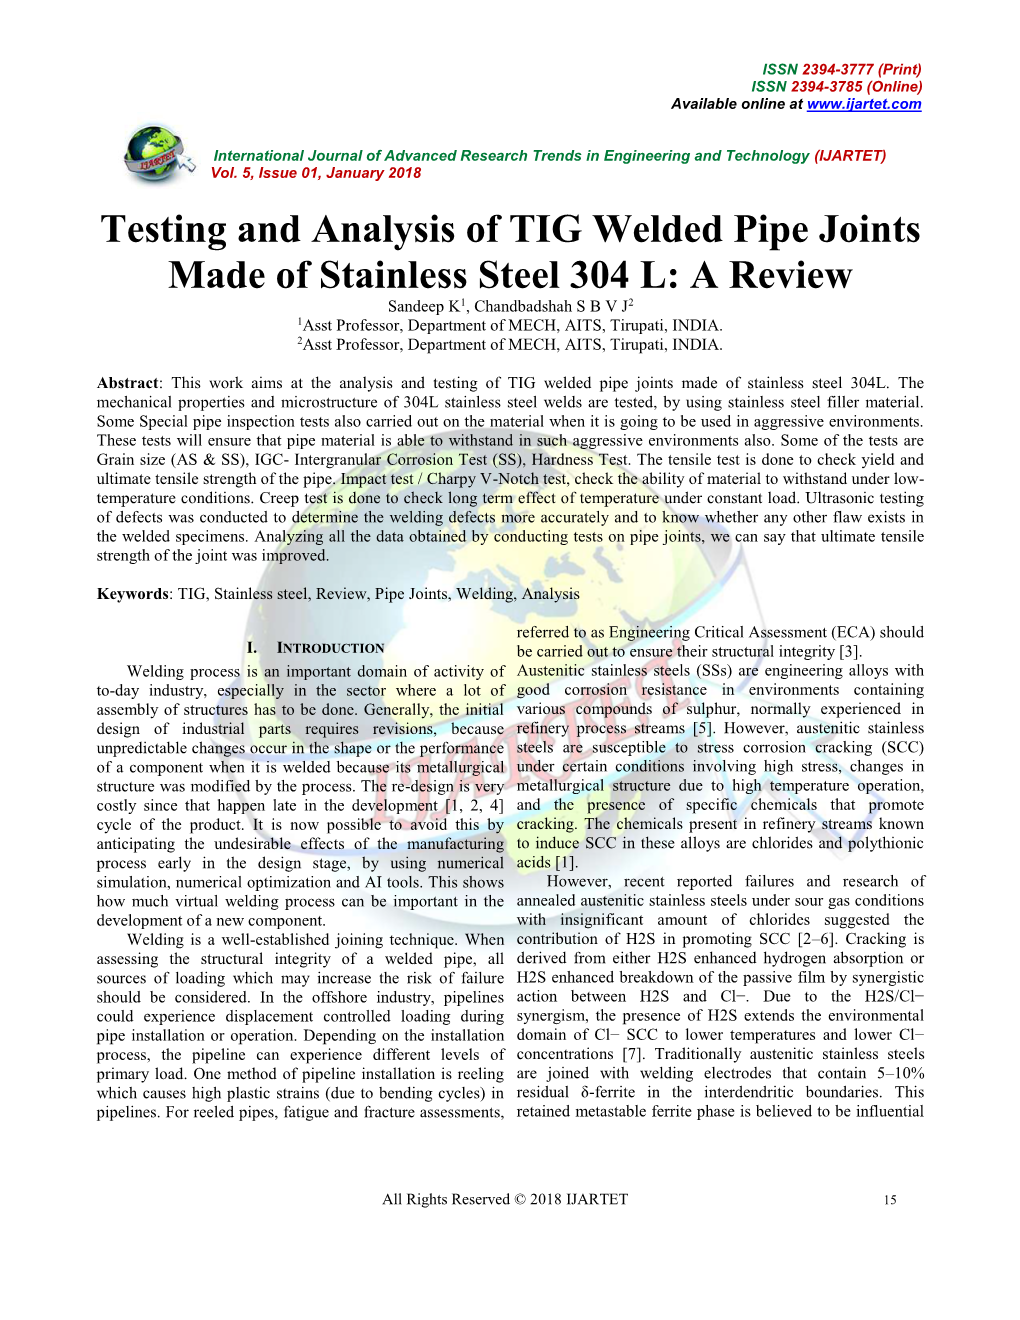 Testing and Analysis of TIG Welded Pipe Joints Made of Stainless Steel